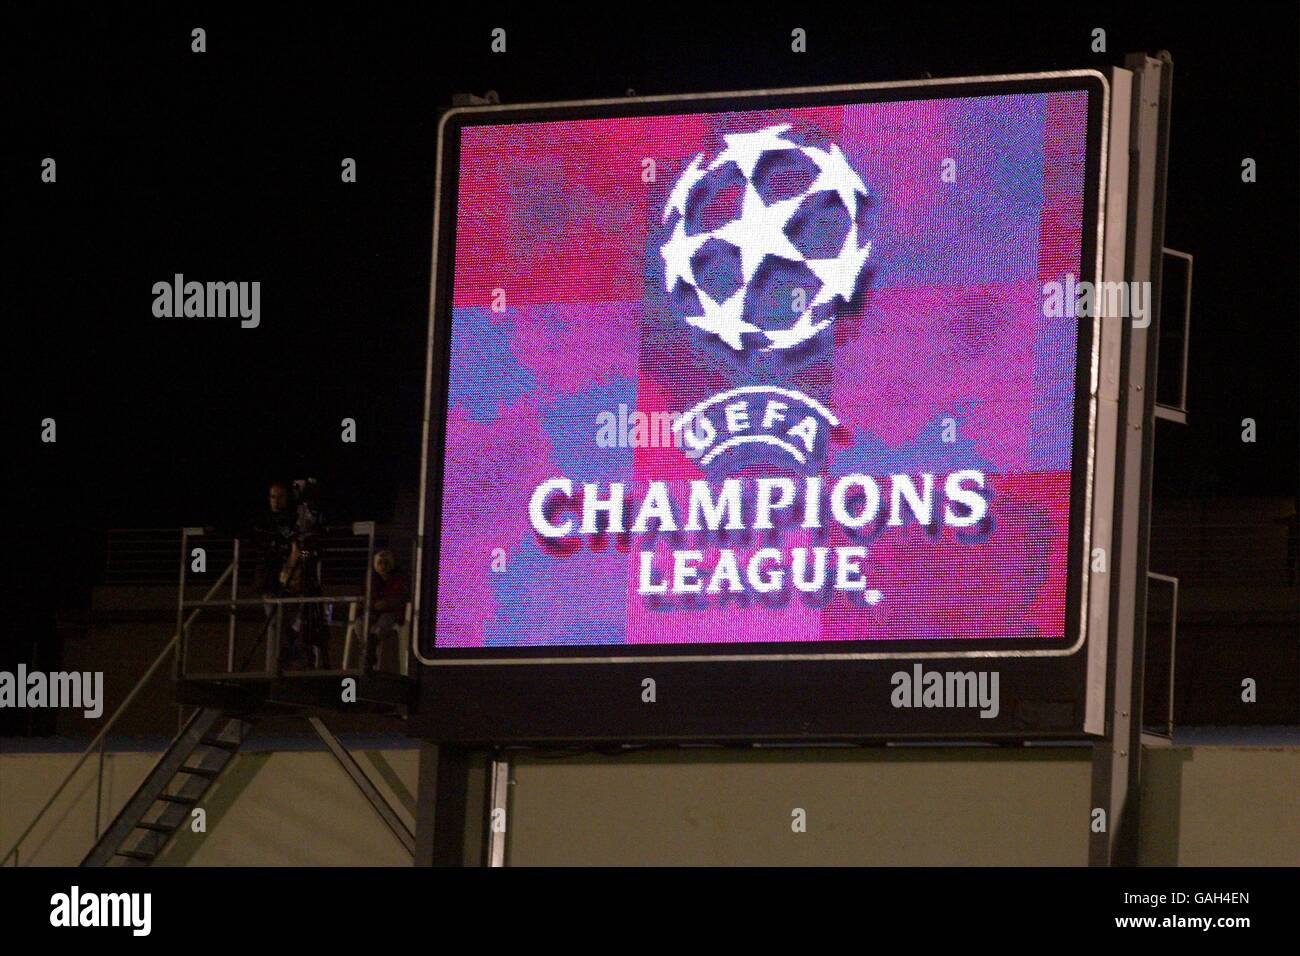 Soccer - UEFA Champions League - Group F - Olympiakos v Manchester United. The UEFA Champions League logo on the large screen Stock Photo